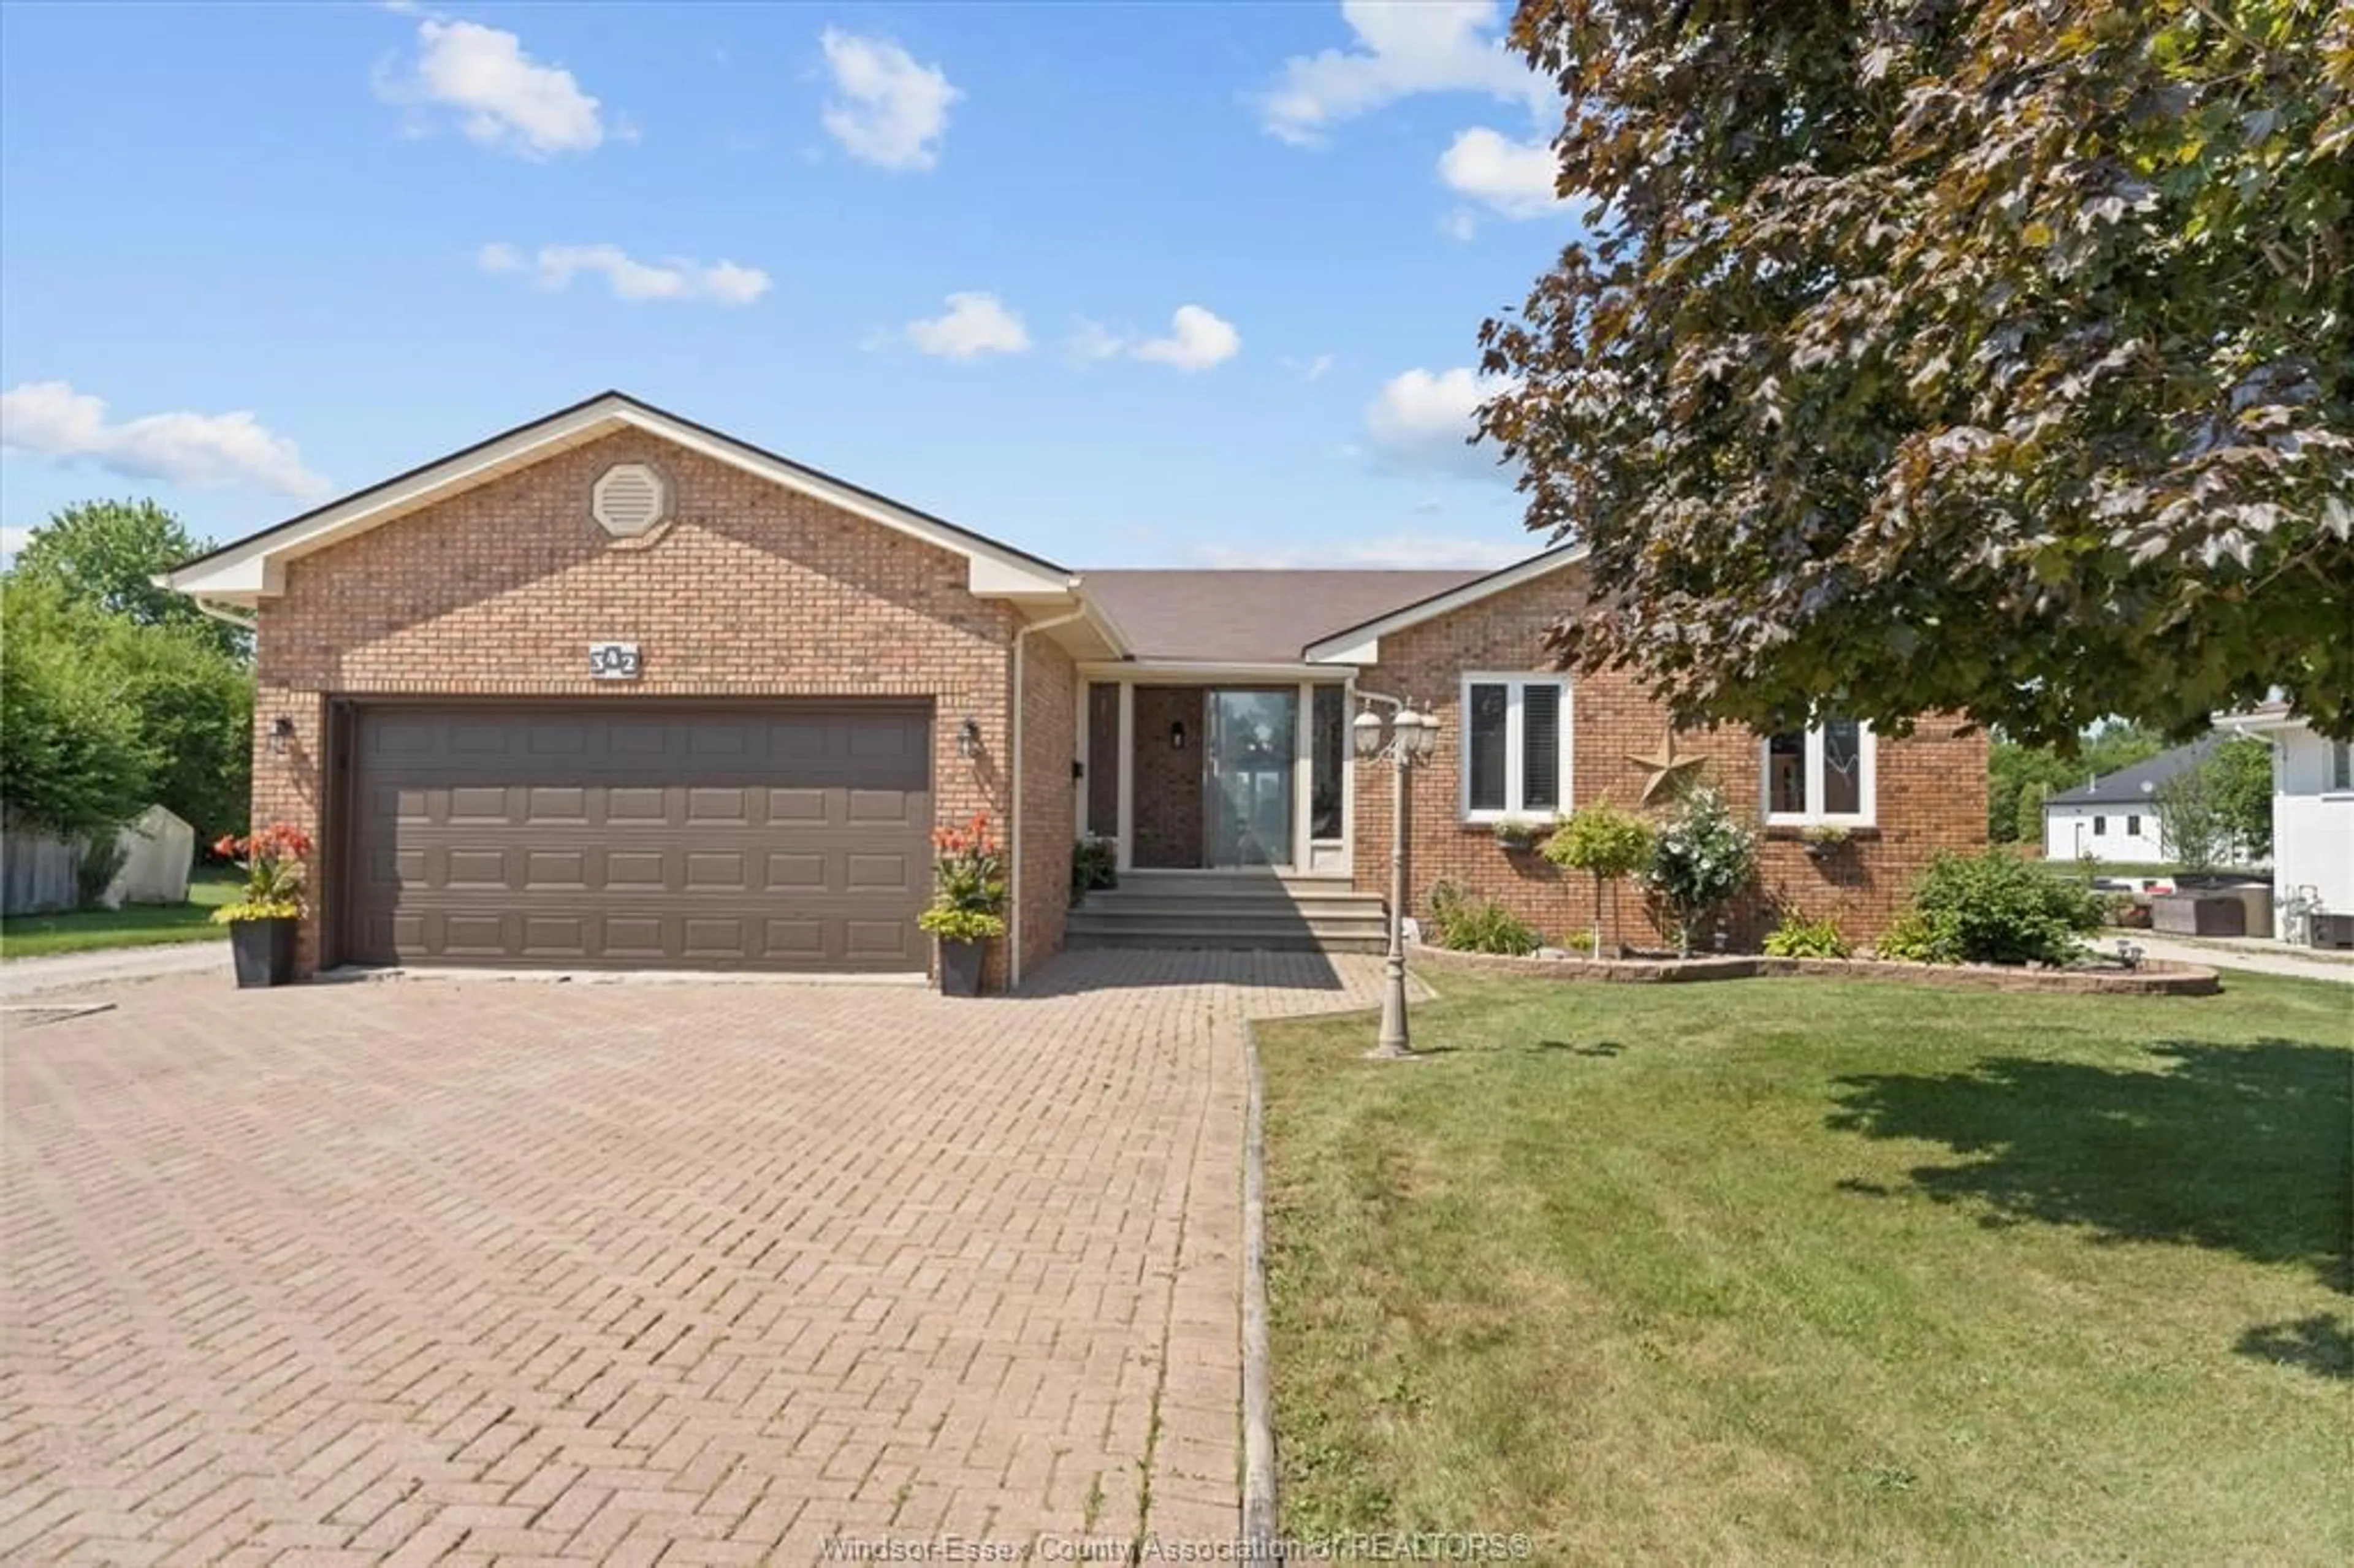 Home with brick exterior material for 342 TEXAS Rd, Amherstburg Ontario N9V 2R7